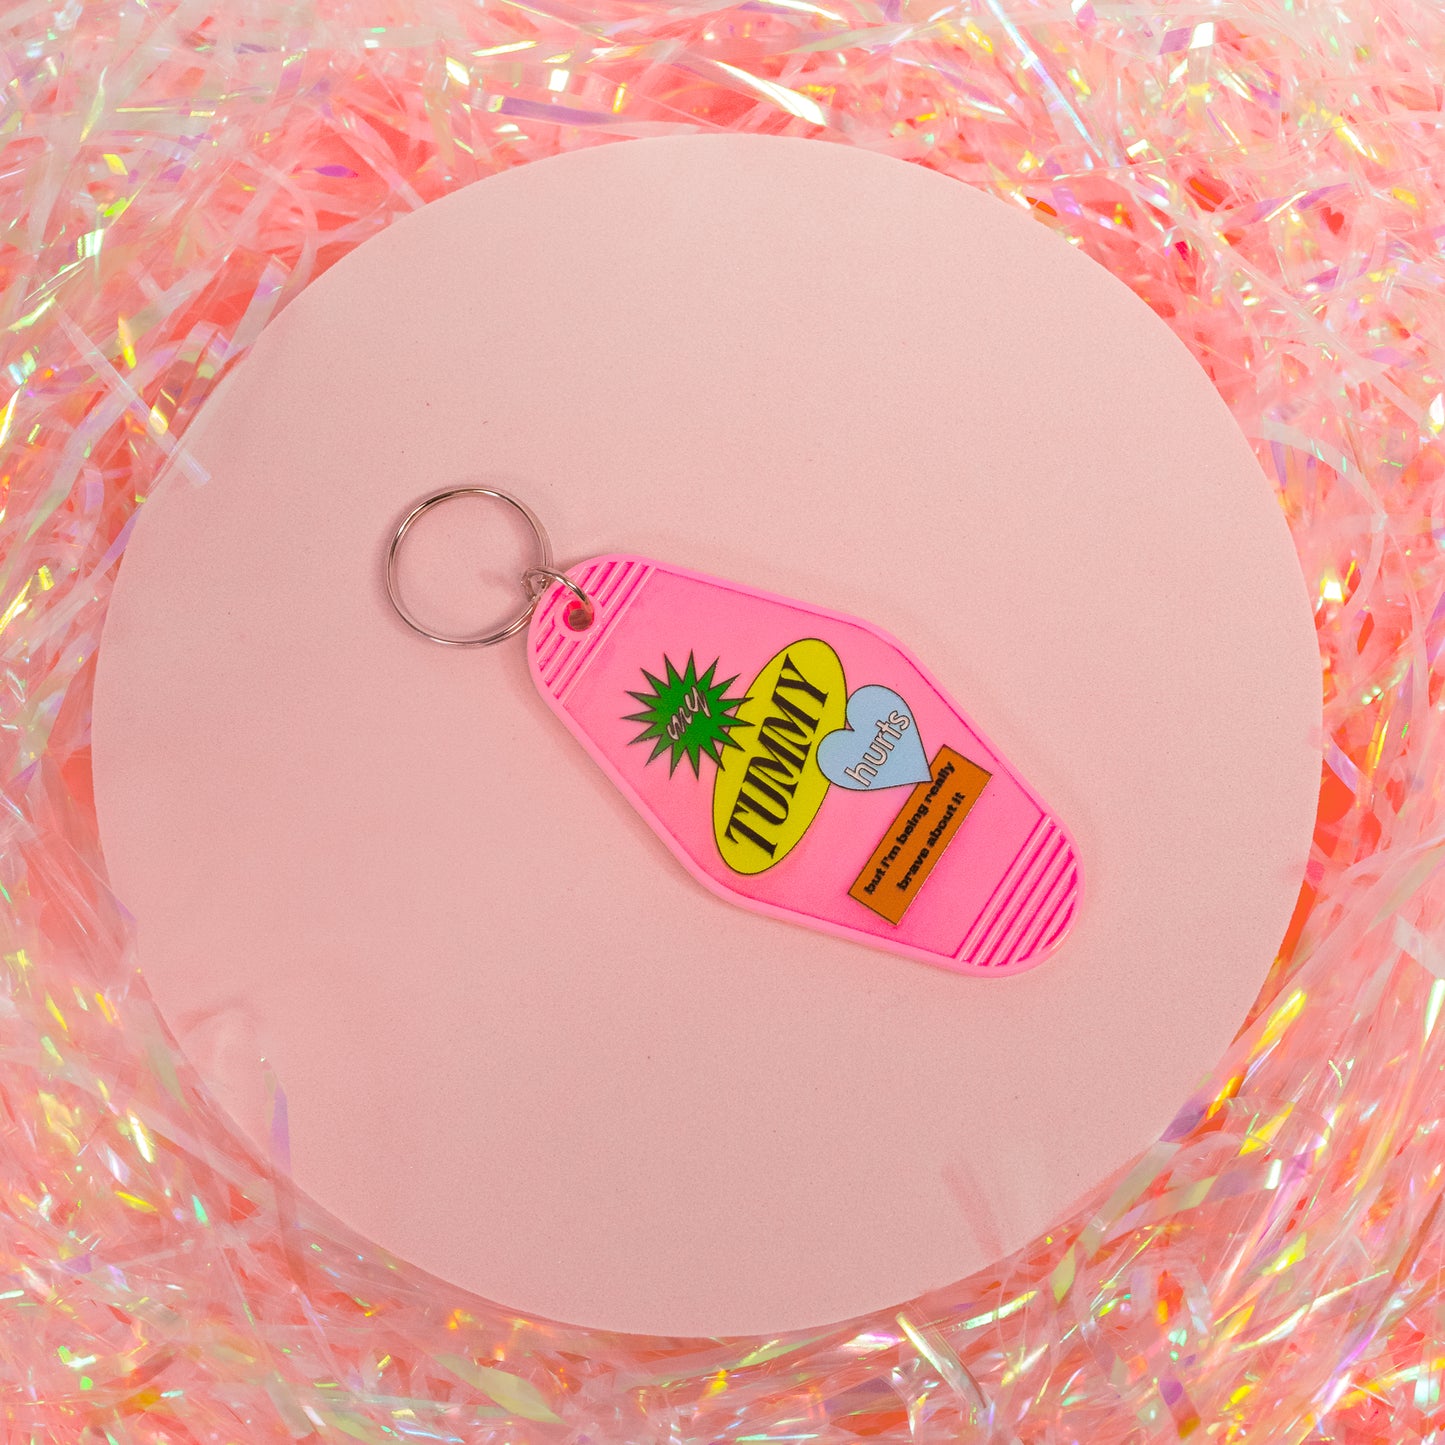 pink with colorful shapes keychain